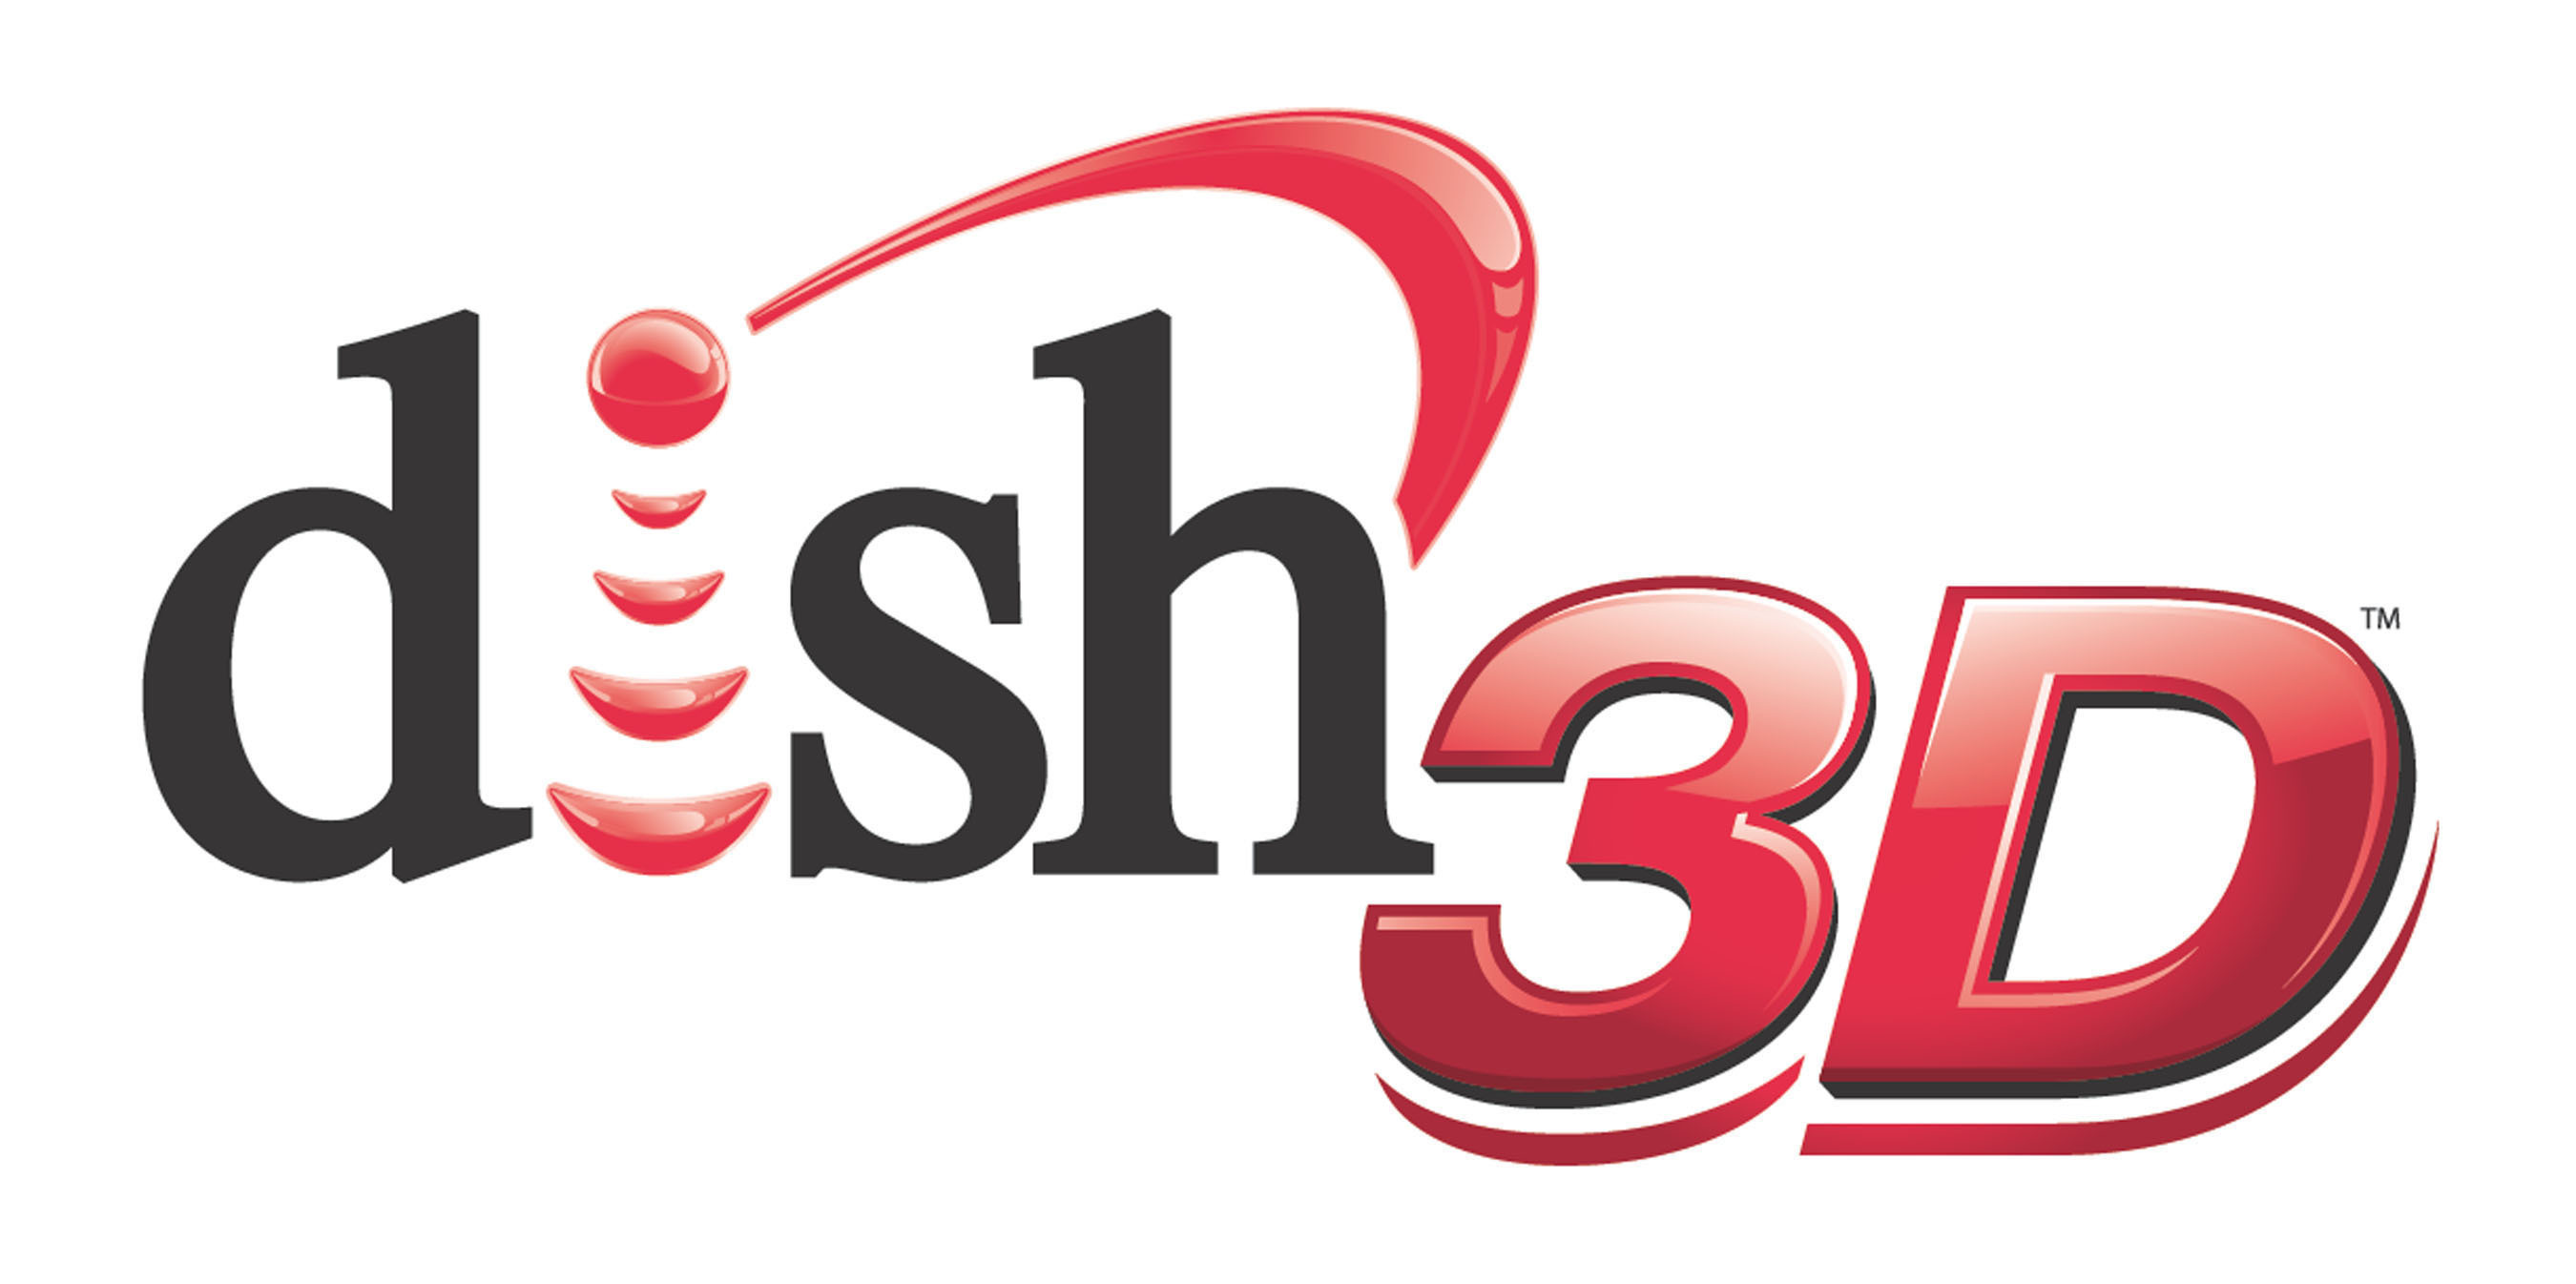 dish network 3d channel lineup